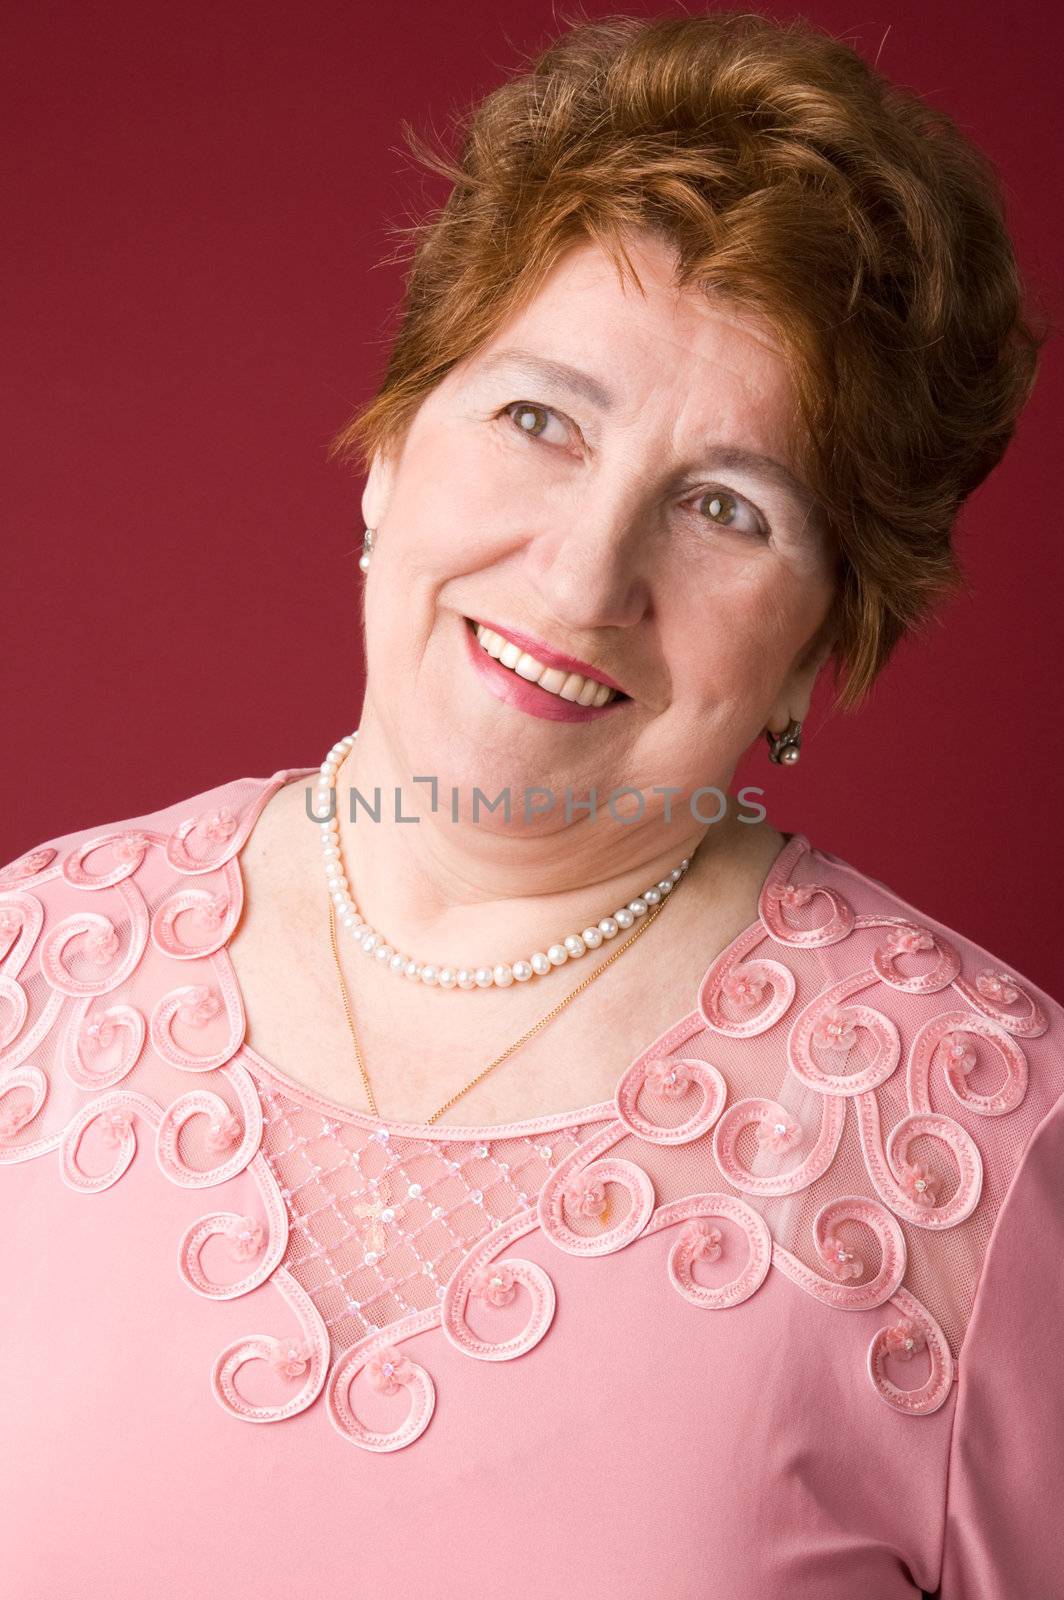 The cheerful elderly woman in a pink dress on a red background.